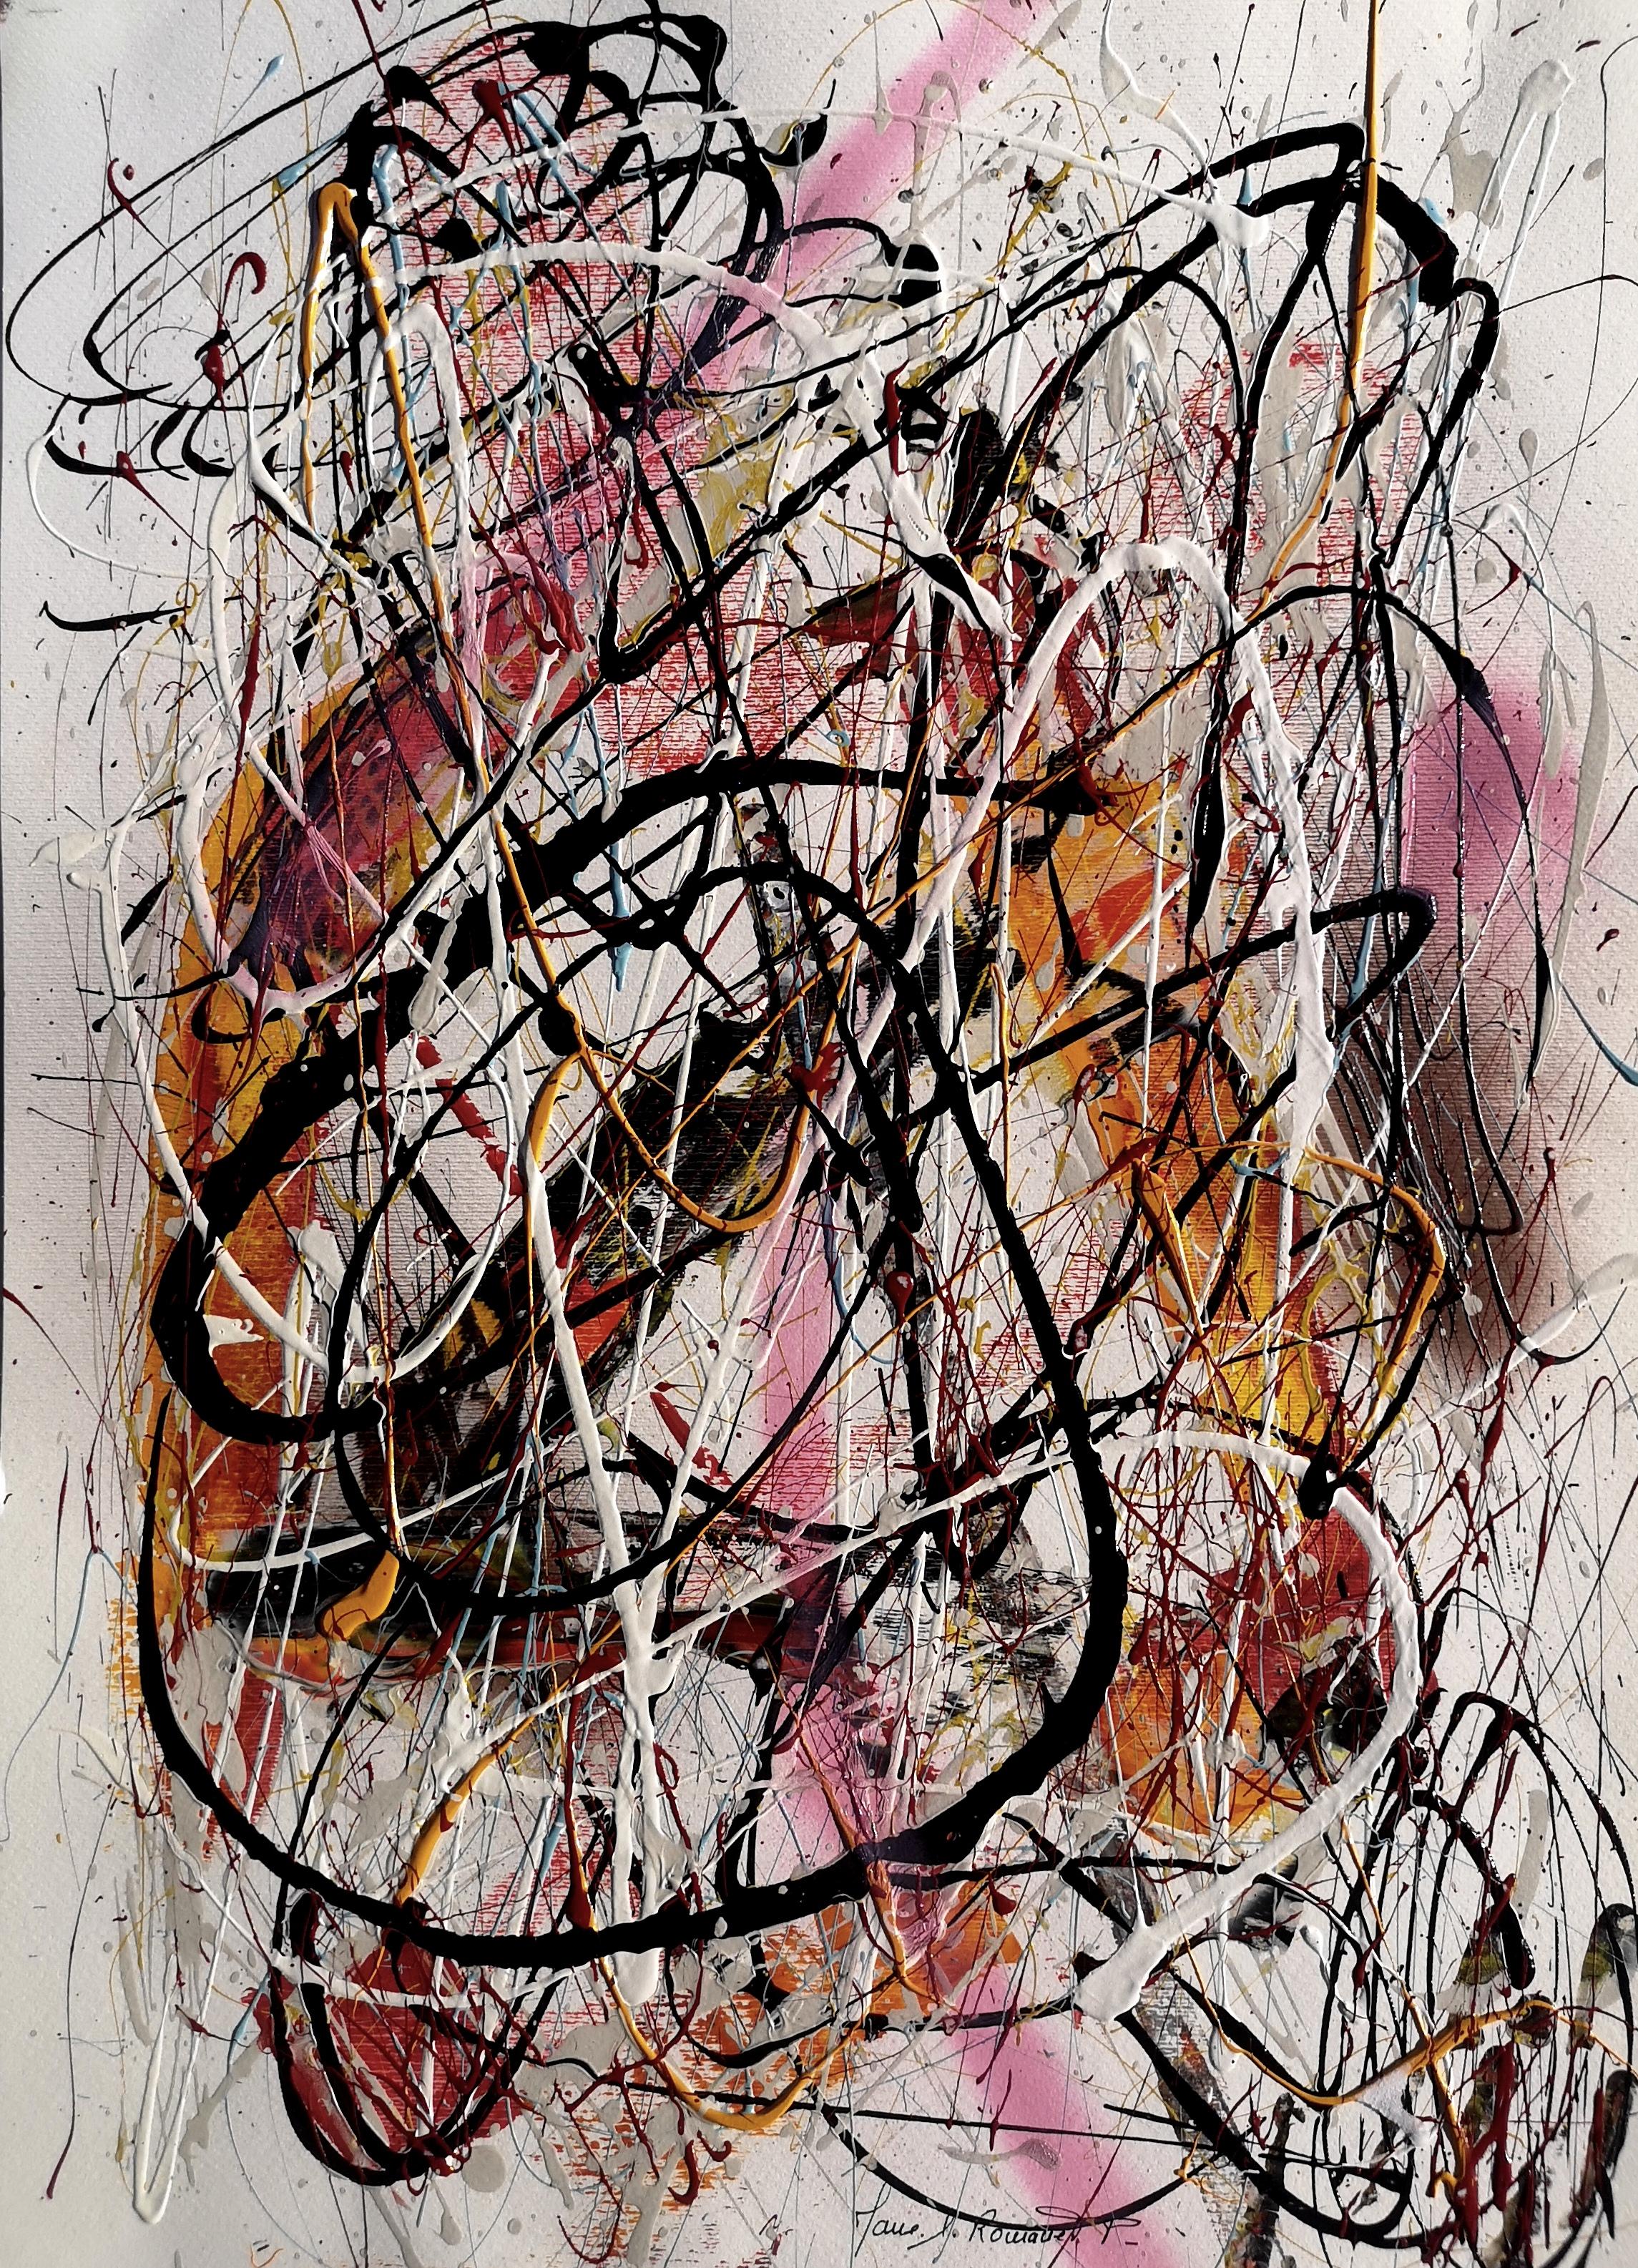 ""SALTIMBANQUE""  Le style Pollock